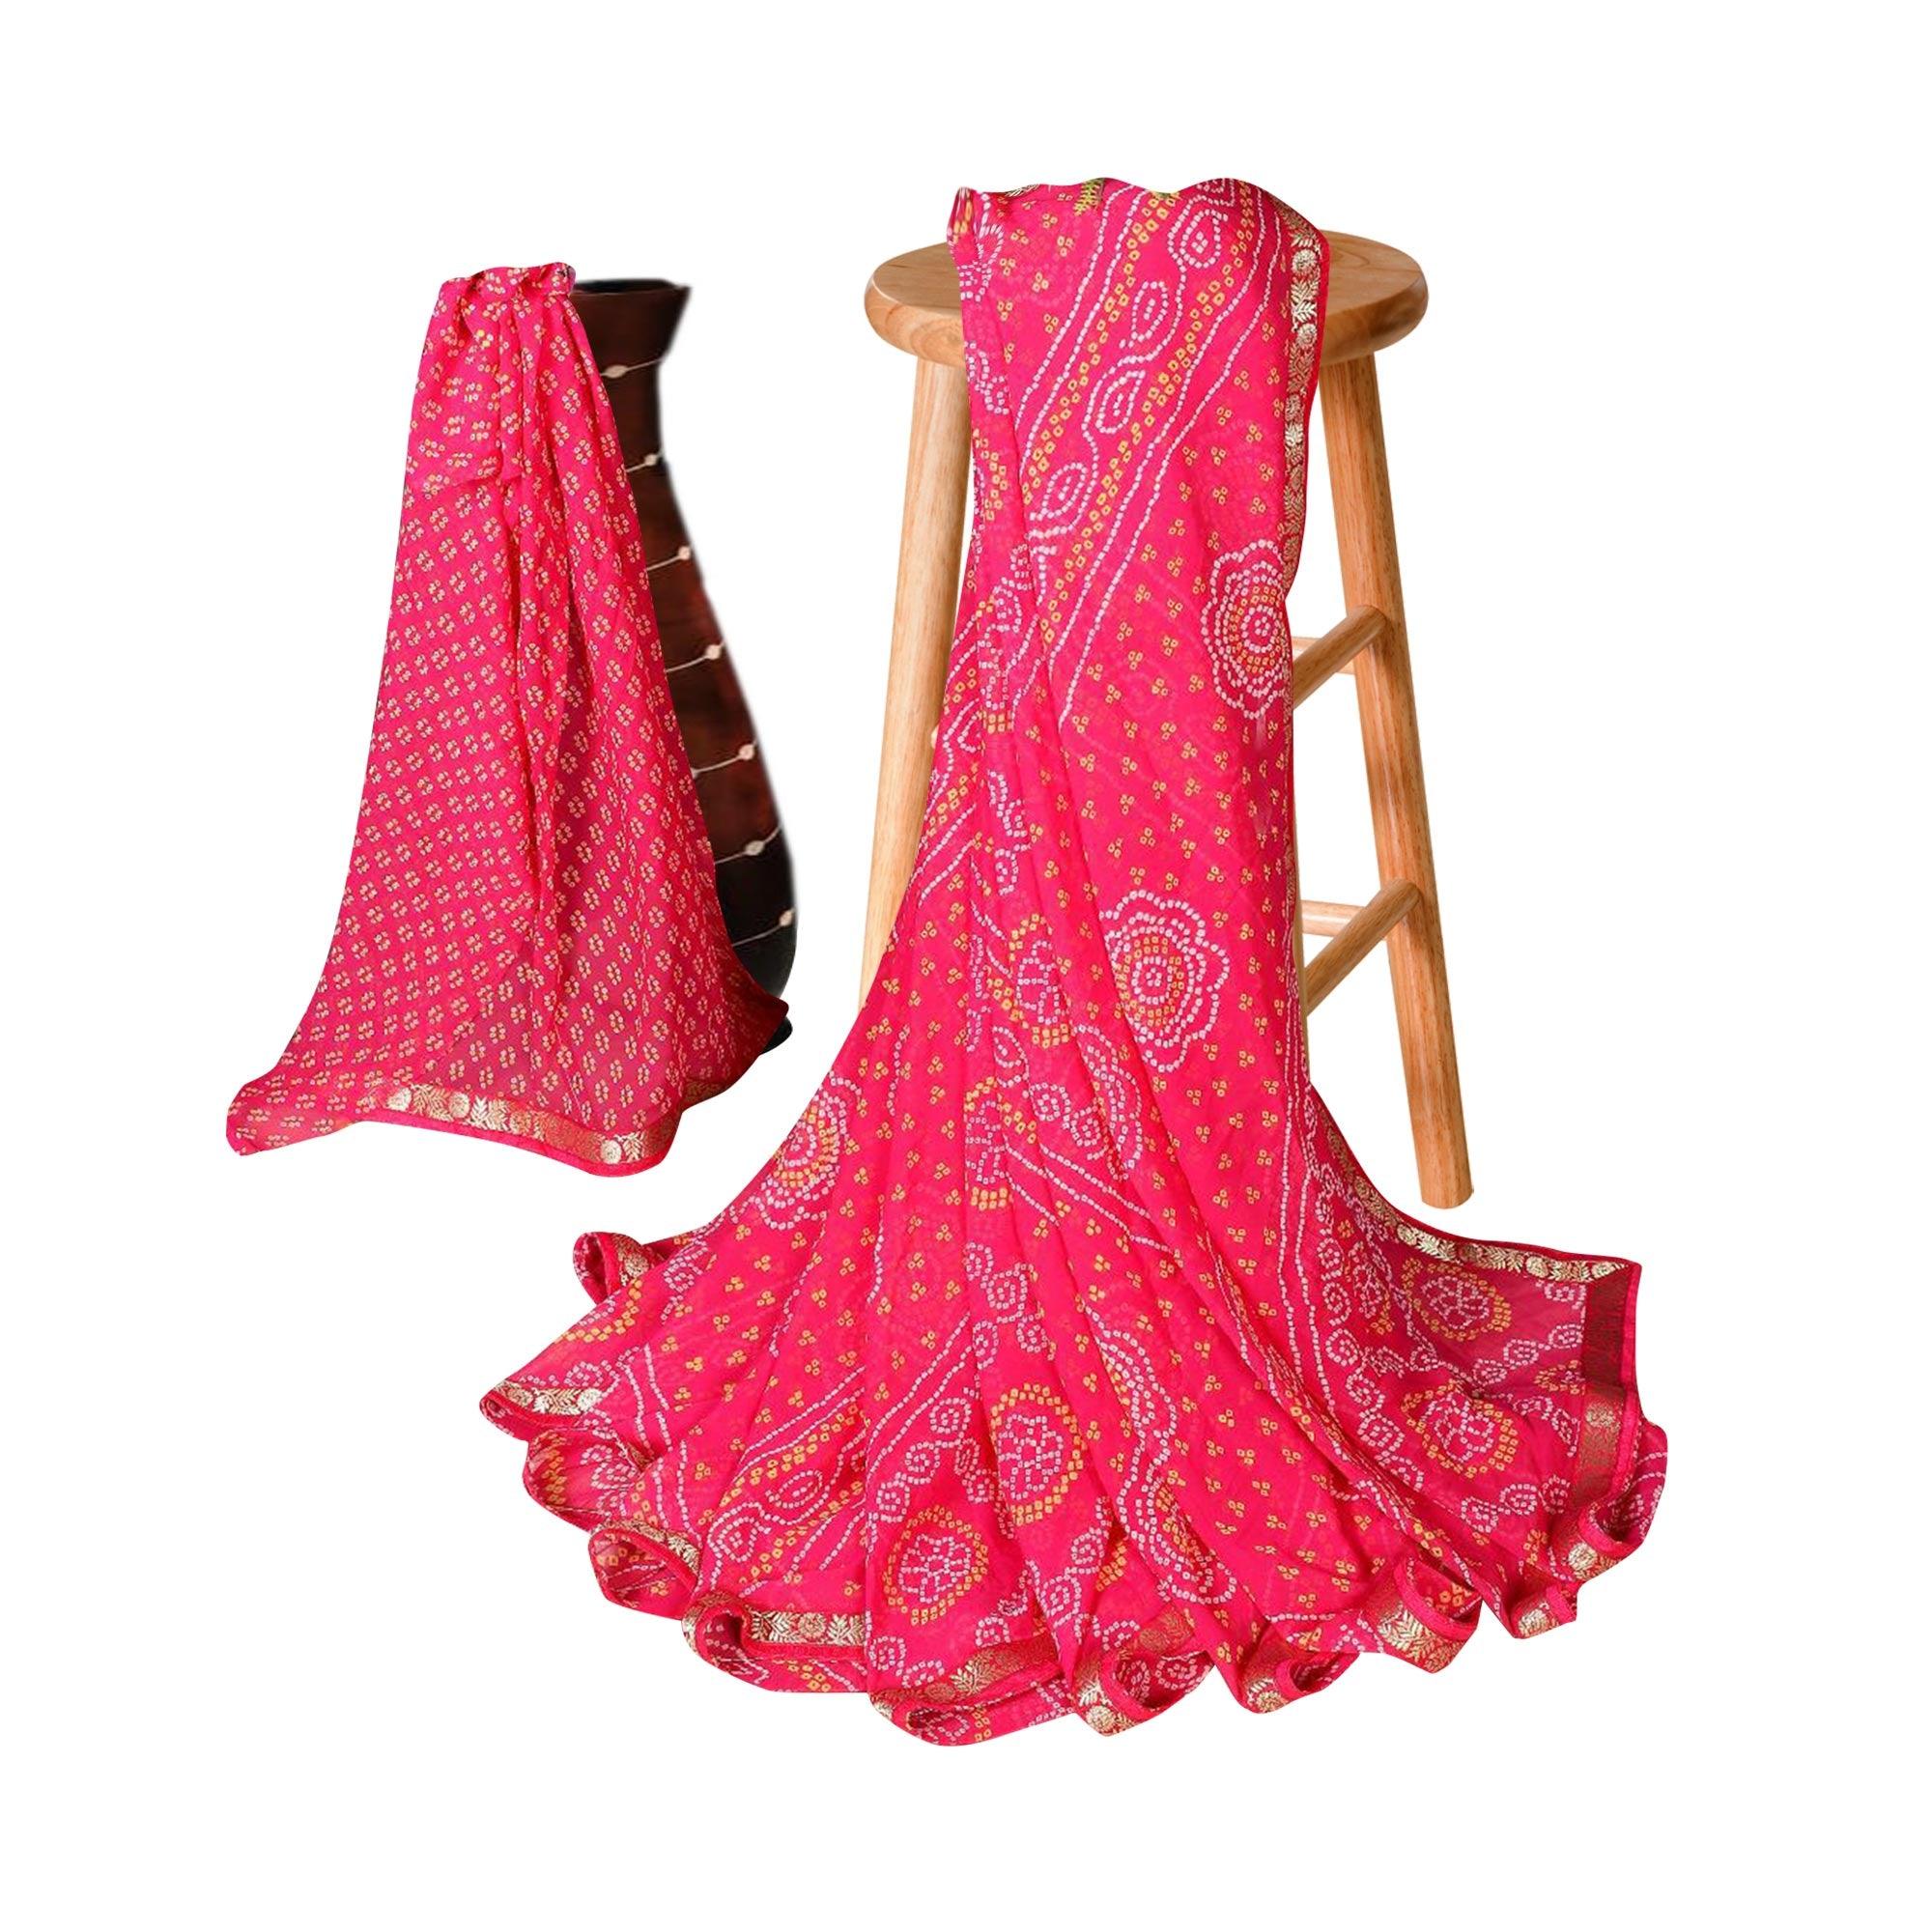 Delightful Pink Colored Casual Bandhani Printed Georgette Saree - Peachmode